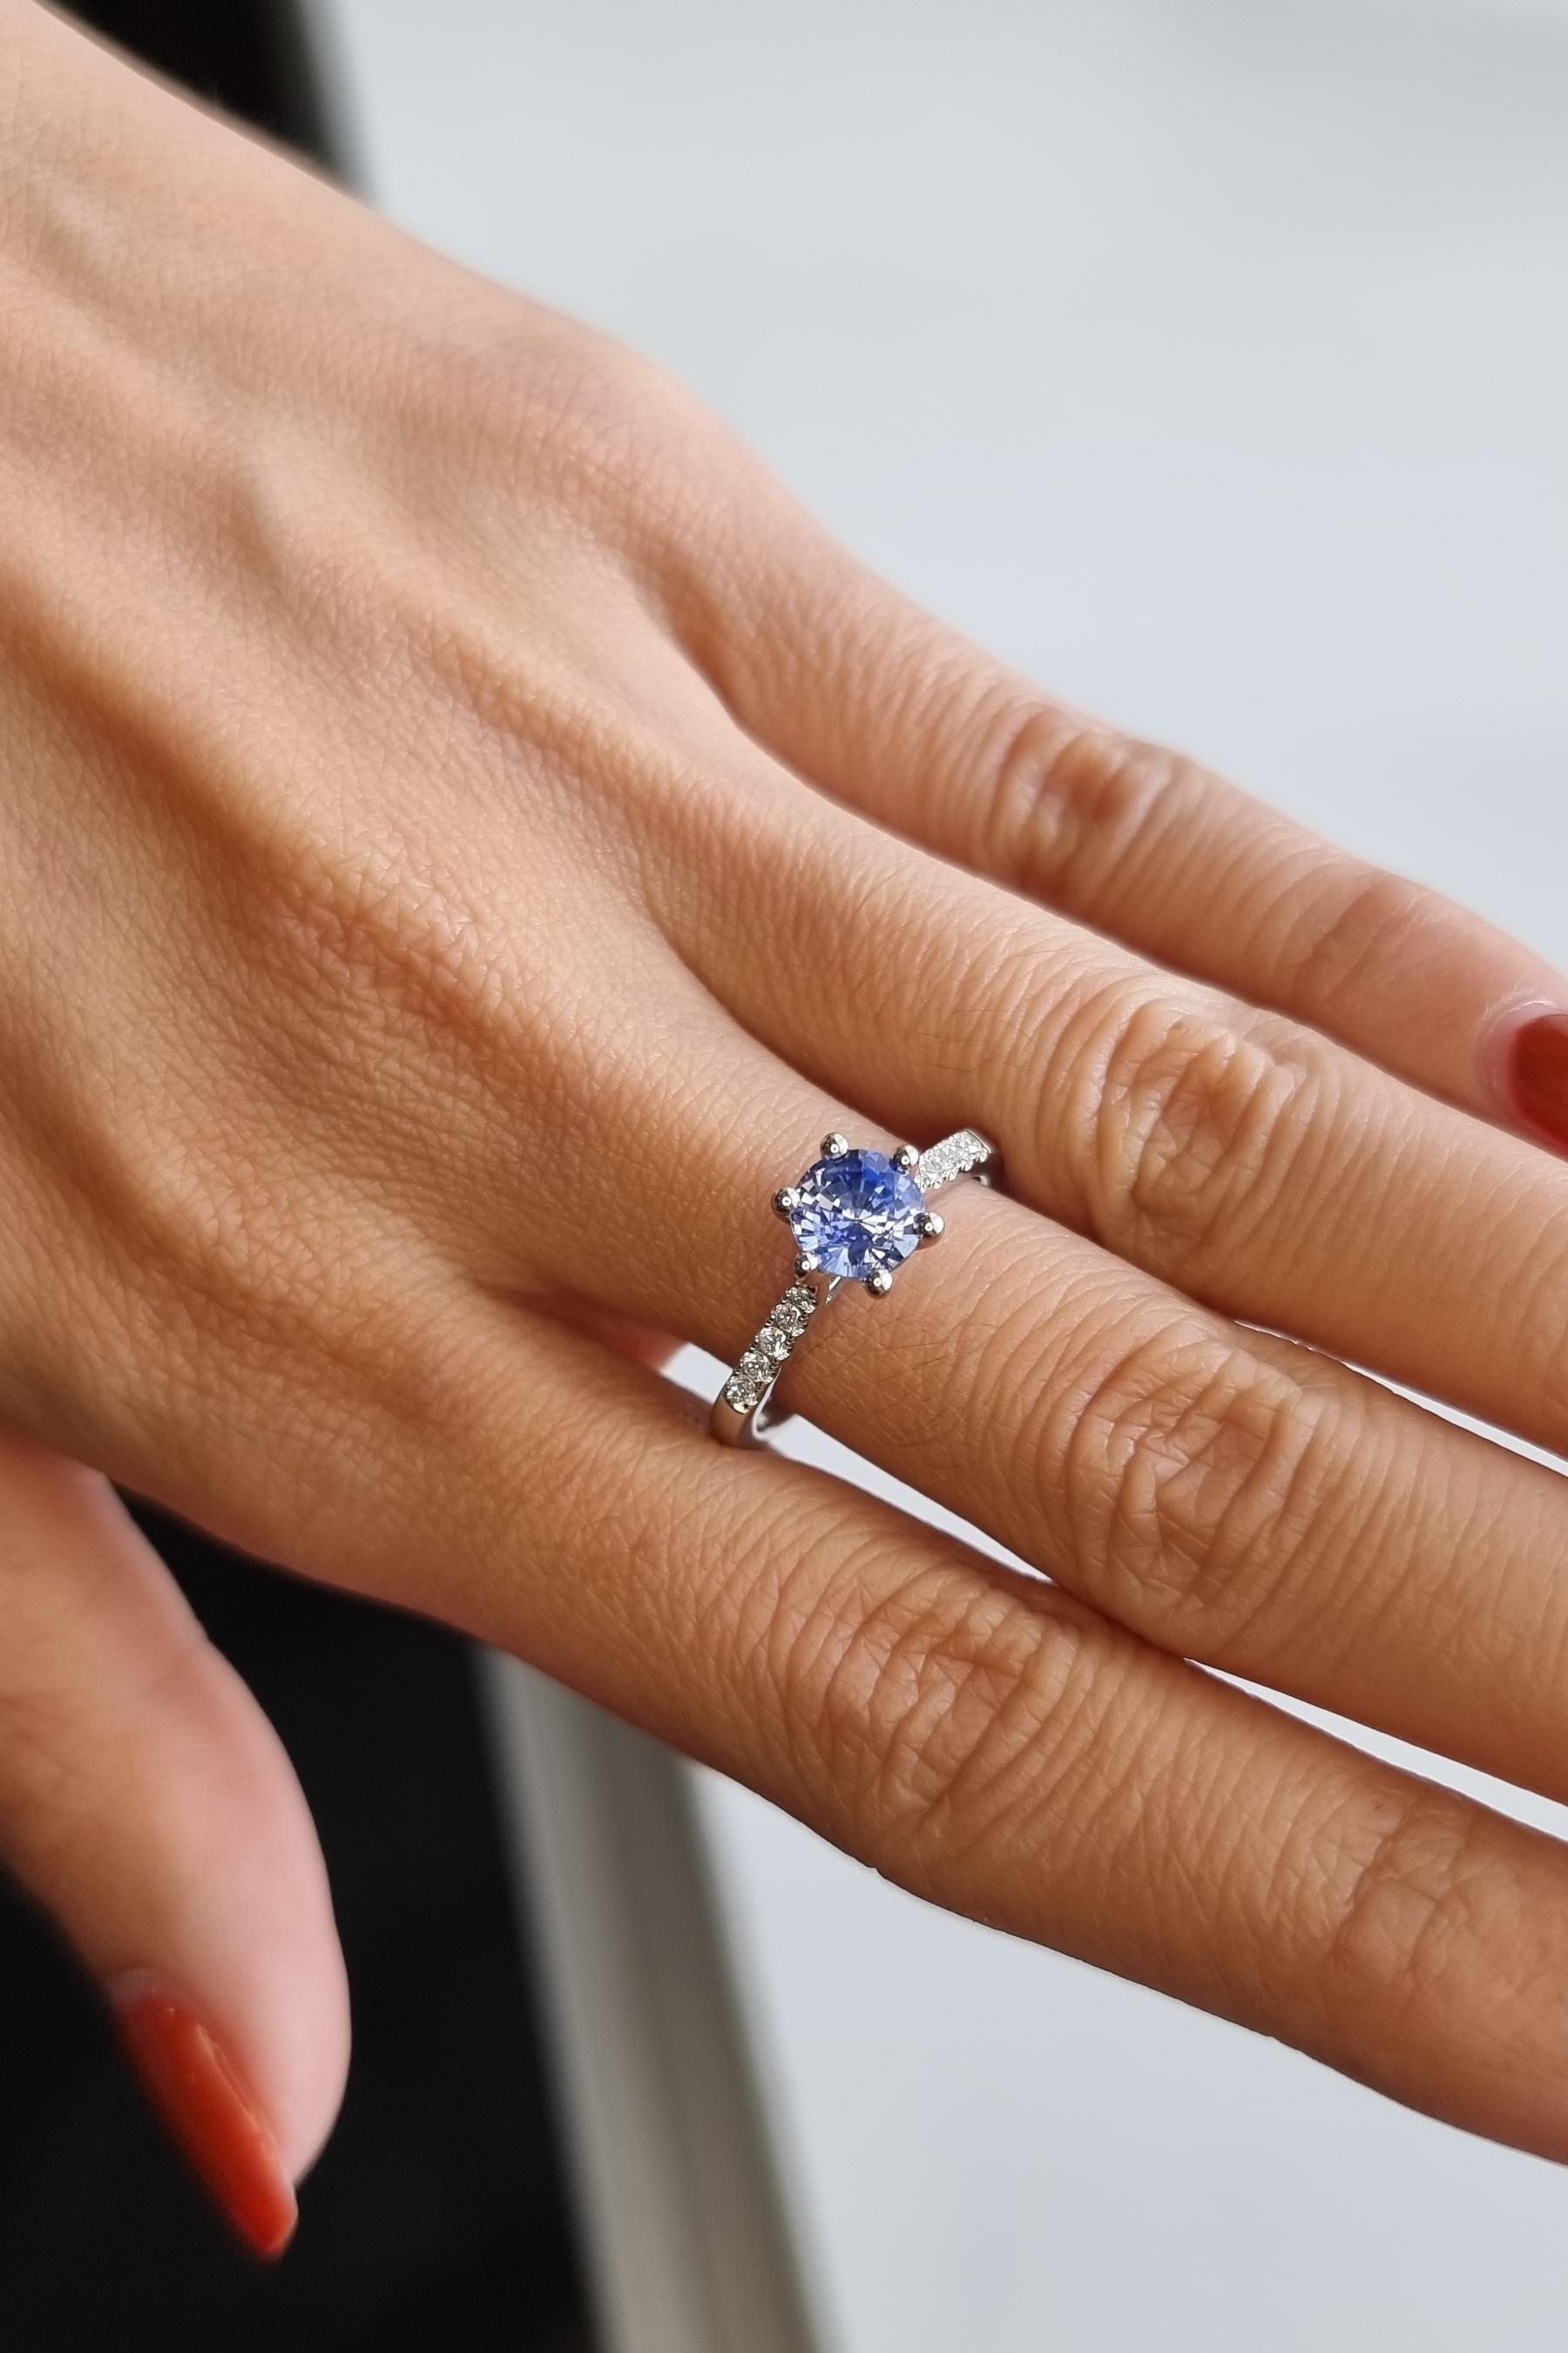 A vision of the sky's crystalline blue, this striking platinum solitaire lets a Ceylon sapphire transport all who behold it into an ethereal realm. Certified by GFCO lab for its prized cornflower hue, the round sapphire dazzles with a saturated